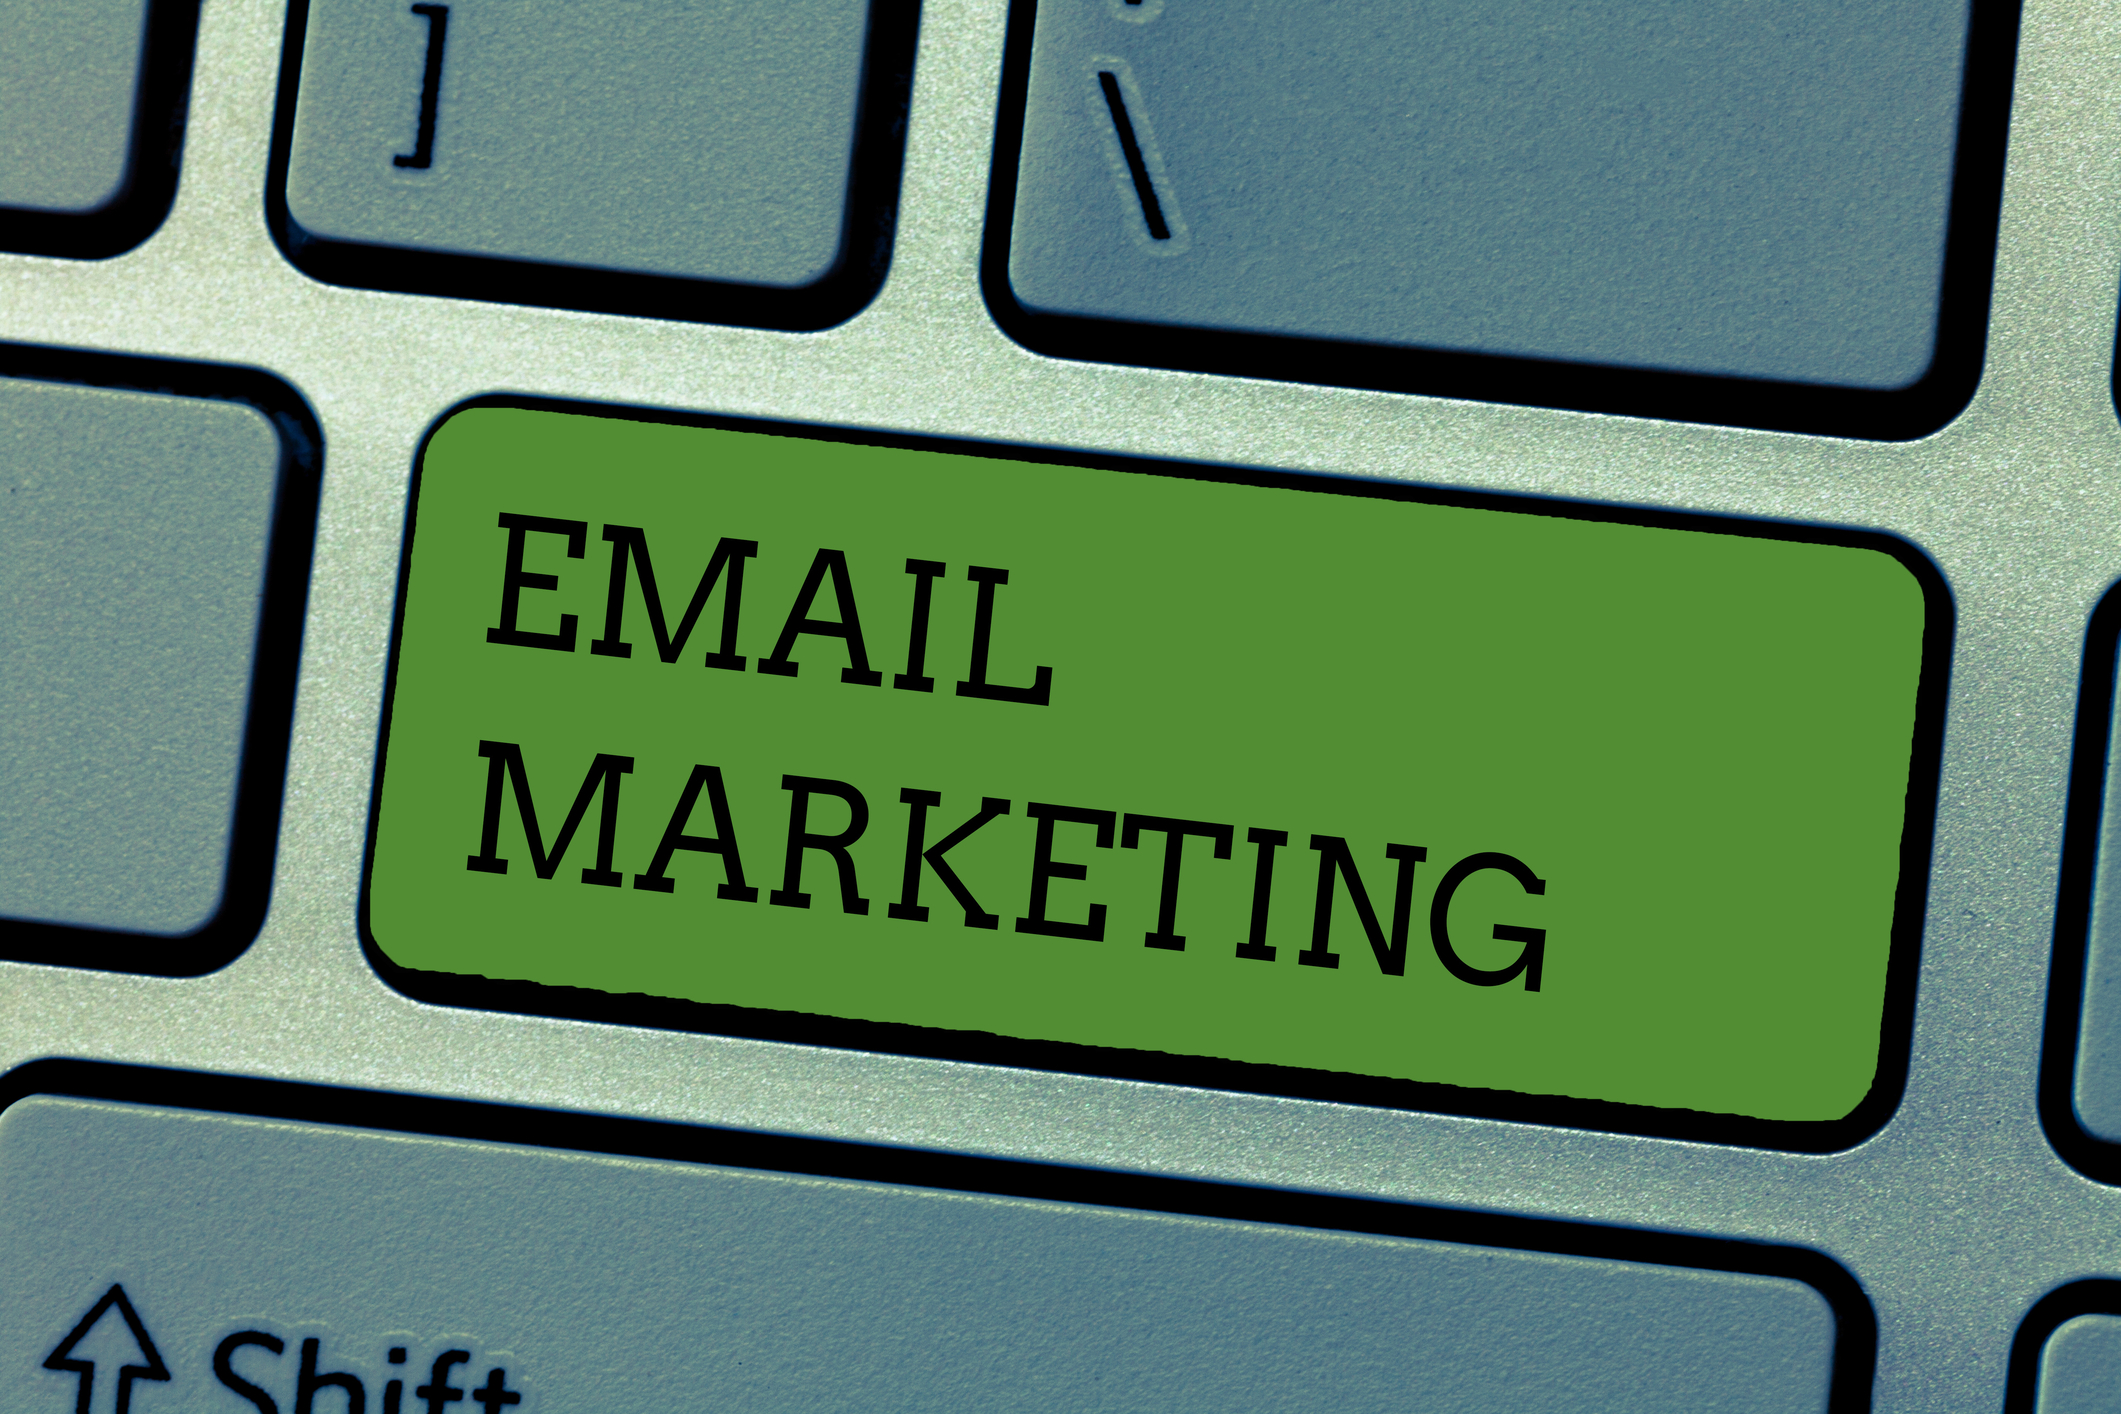 Learn email marketing tips from the get smart group